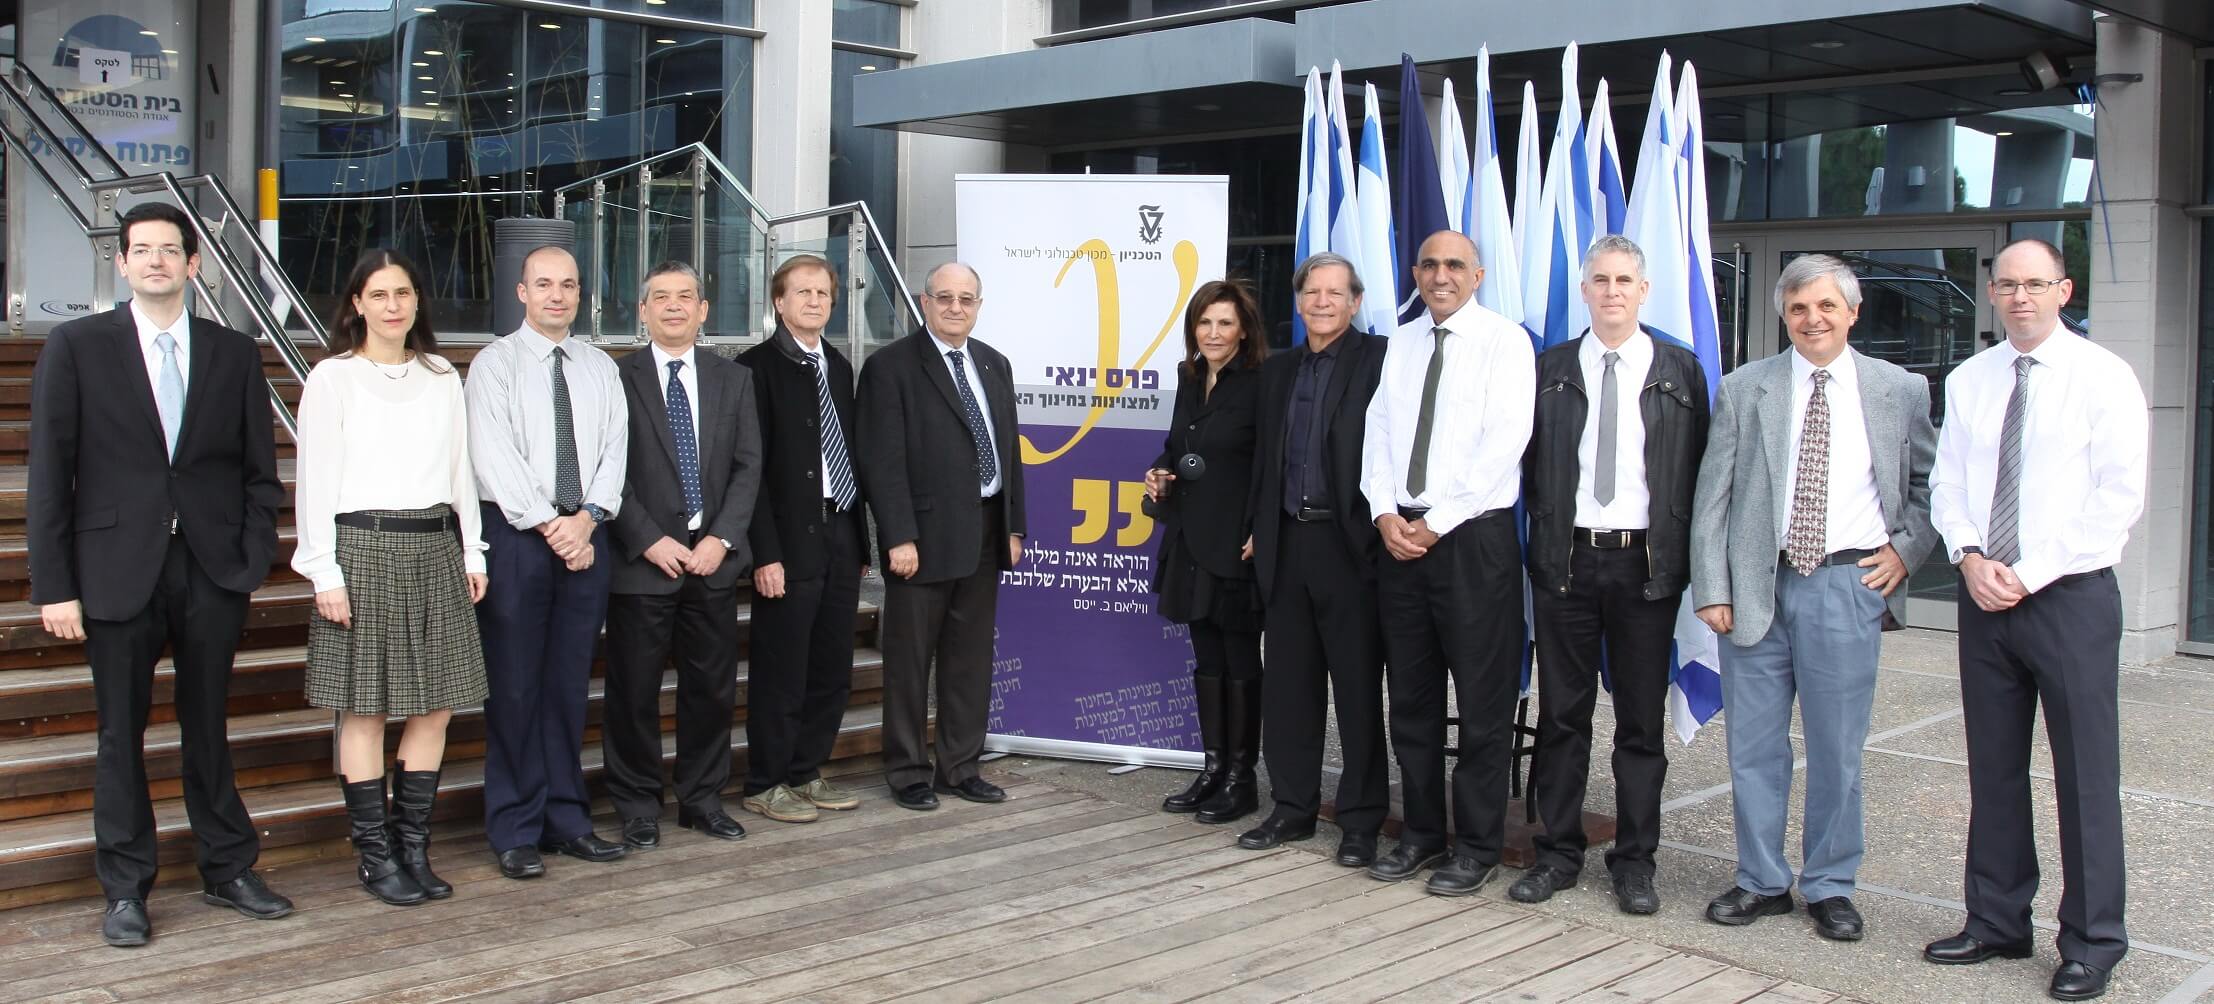 In the photo: The award winners with the president of the Technion, Professor Peretz Lavi (in the center, to the right of the sign), and with Rachel and Moshe Yanai (in the center, to the left of the sign). Photographed by: Yoav Bacher, Technion Spokesperson.